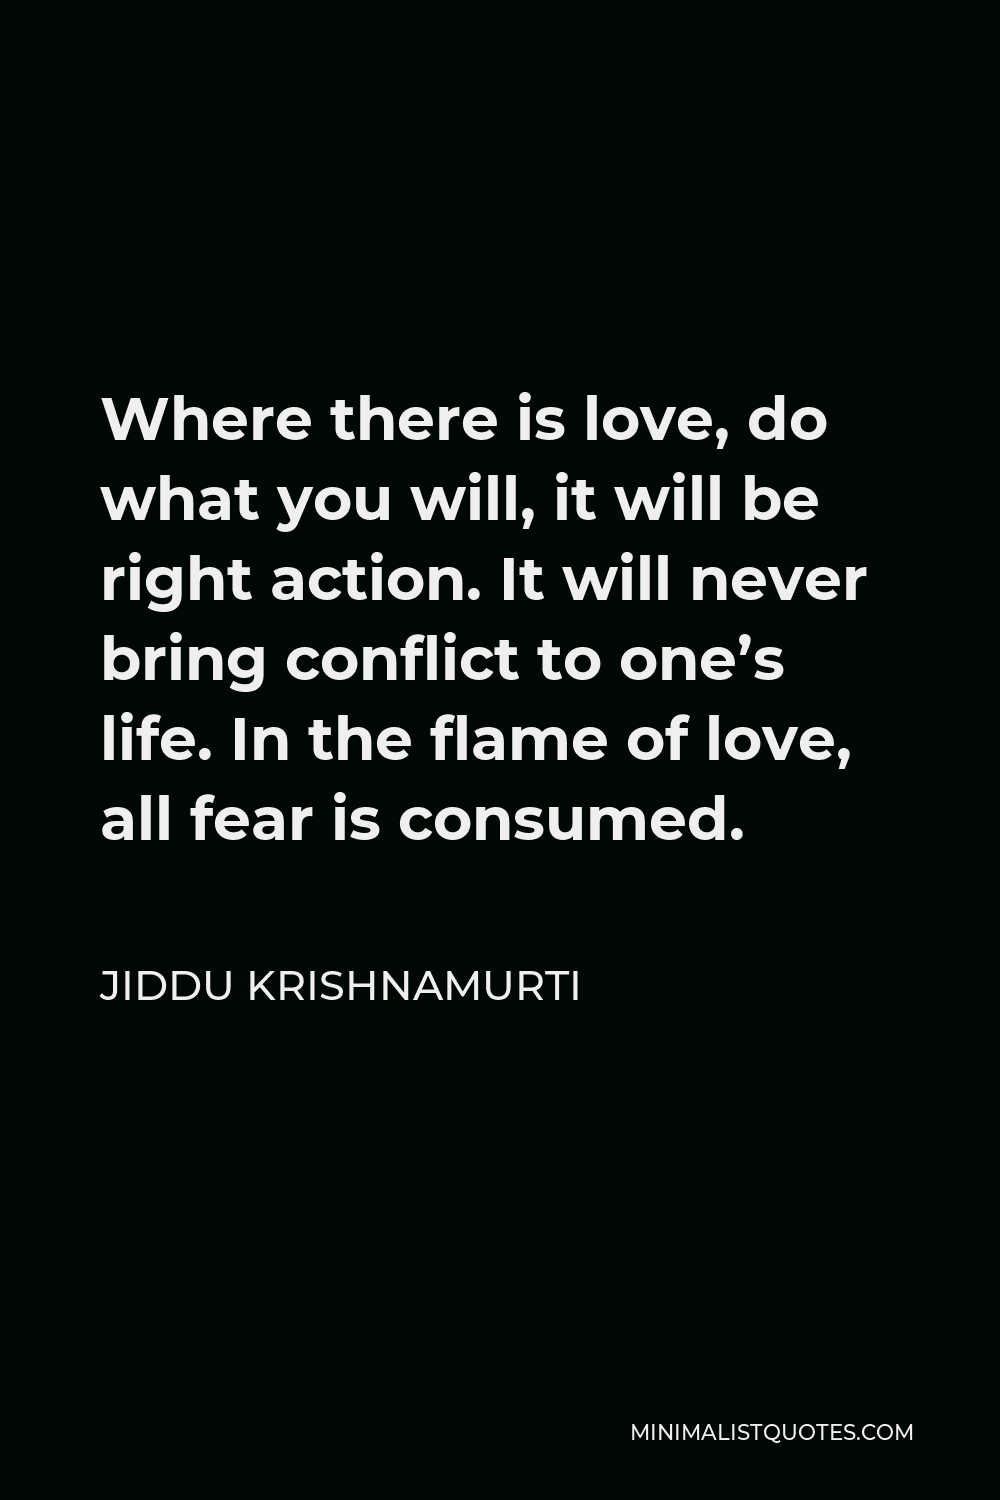 Jiddu Krishnamurti Quote - Where there is love, do what you will, it will be right action. It will never bring conflict to one’s life. In the flame of love, all fear is consumed.